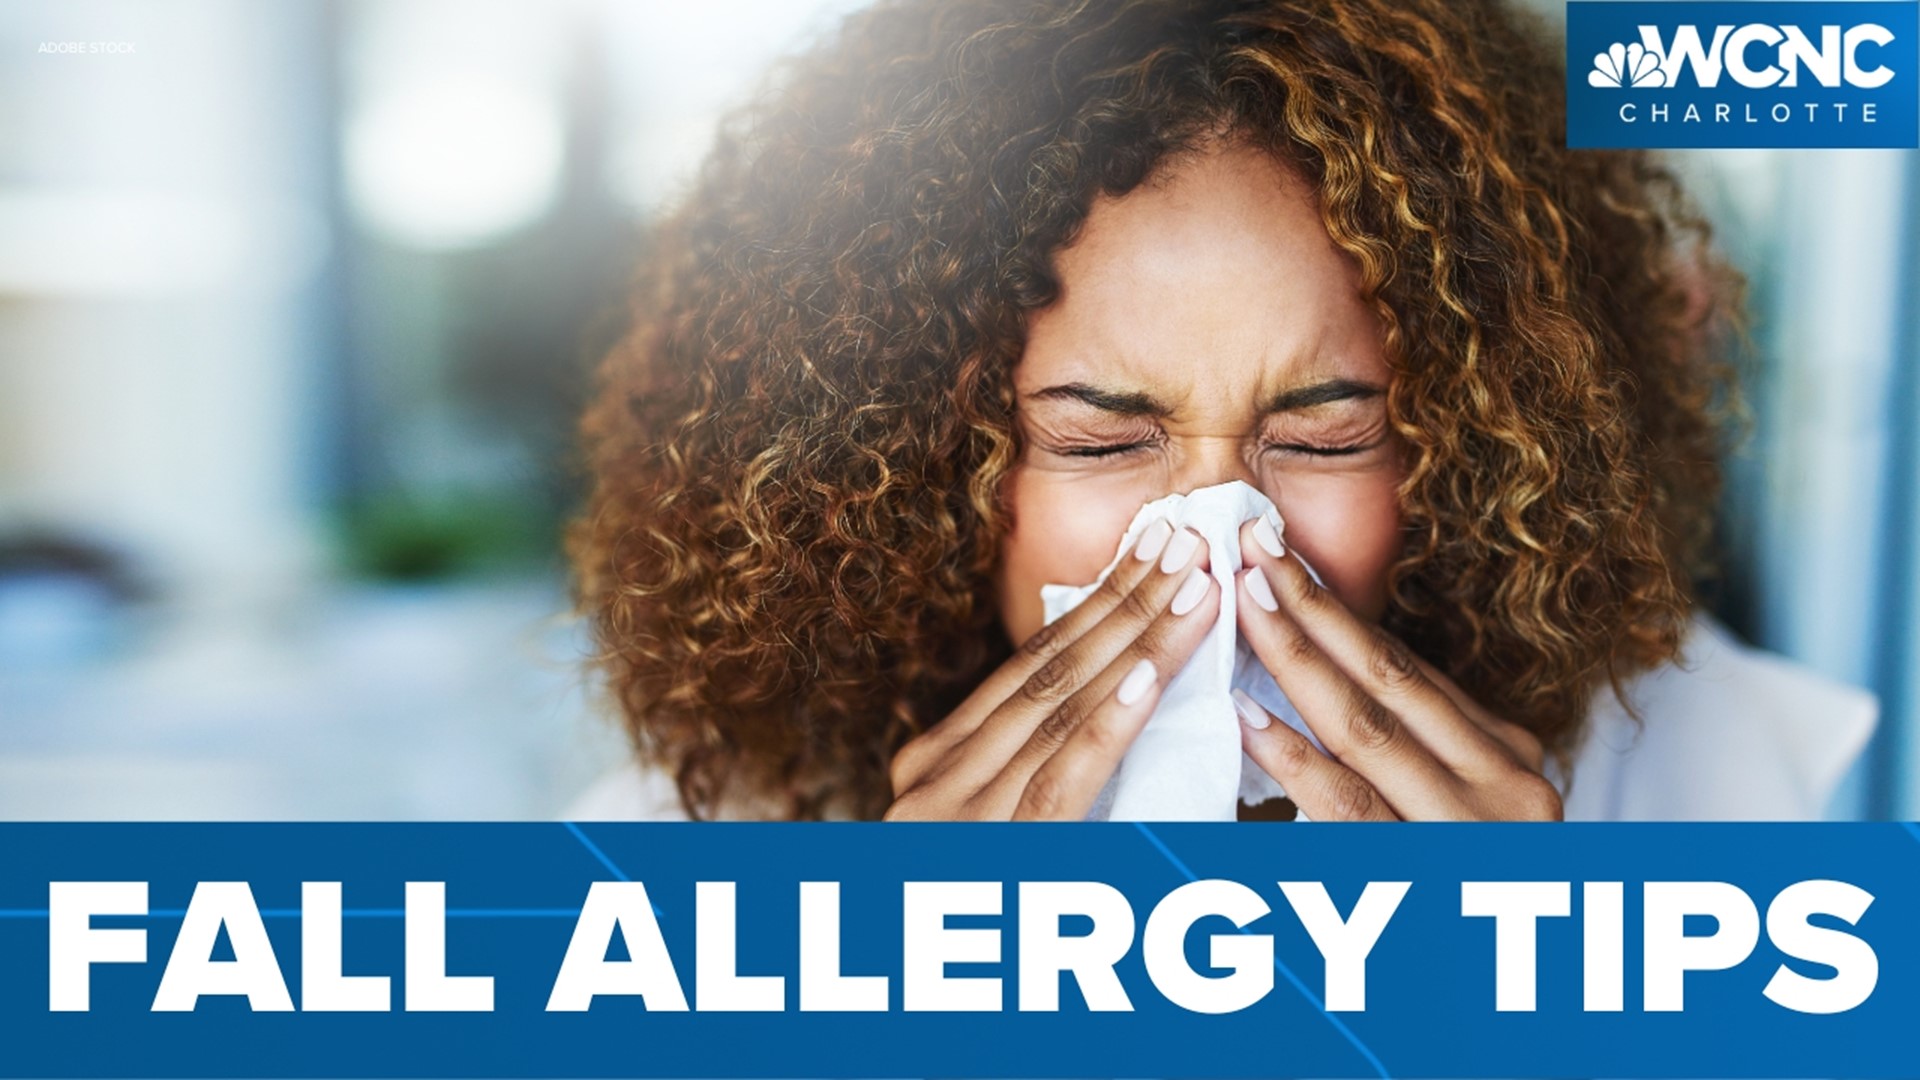 First day of fall means fall allergies